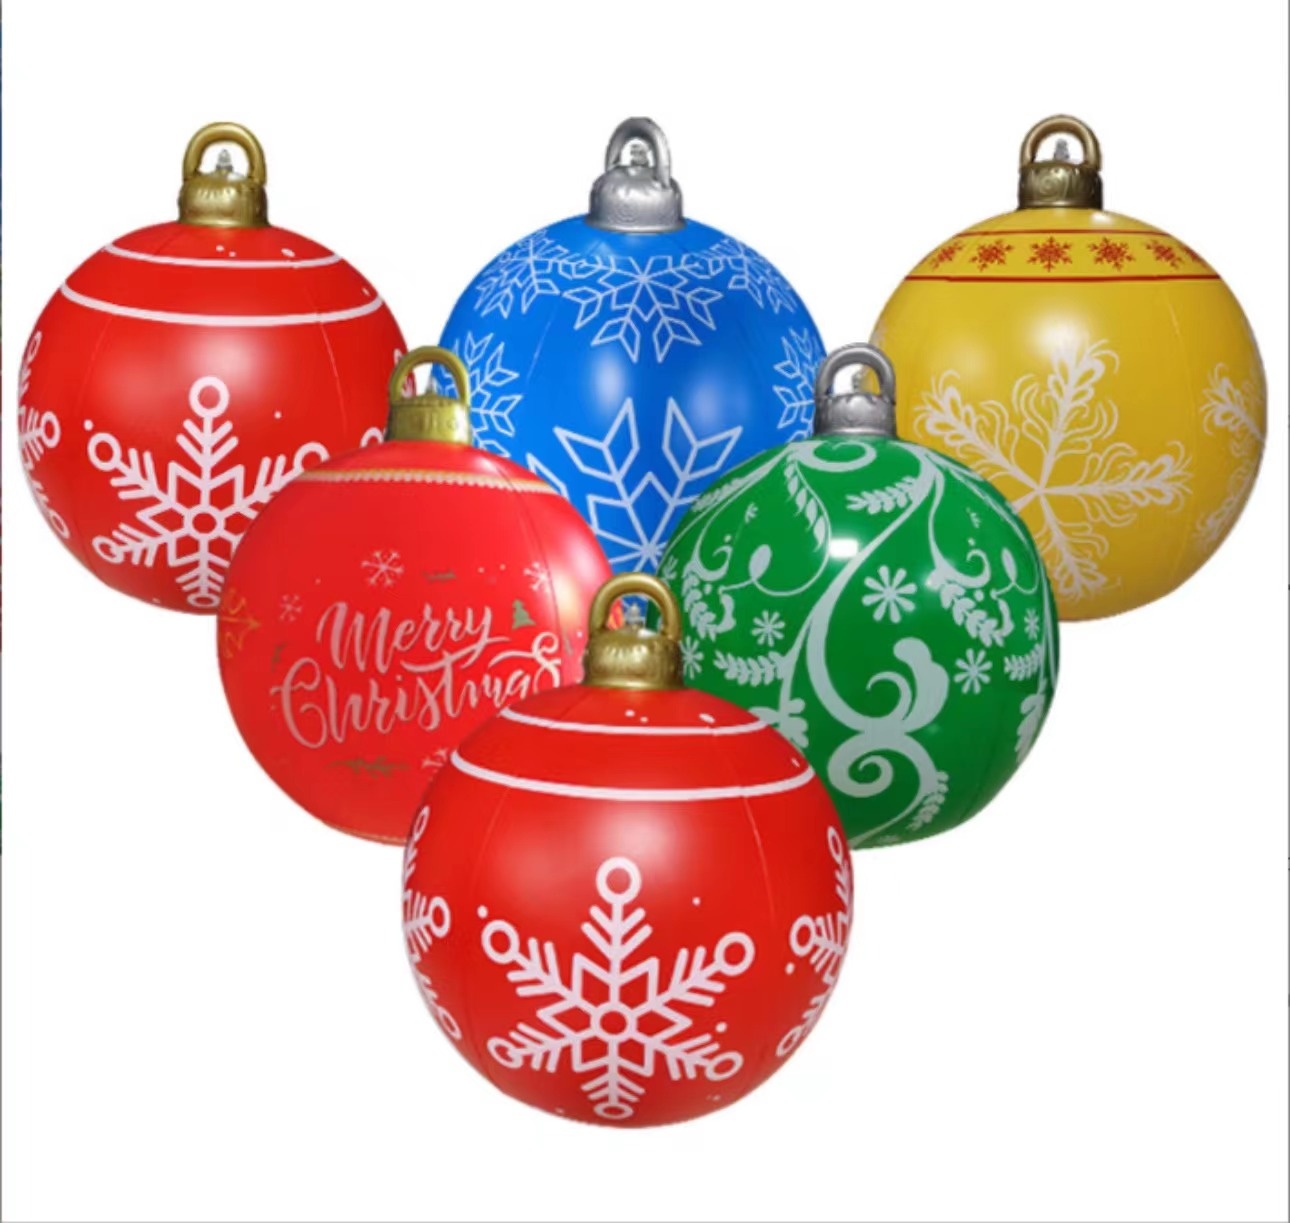 Hot Sale inflatable Christmas ball luminous holiday decorations LED lights 16 color ball courtyard Christmas tree hanging